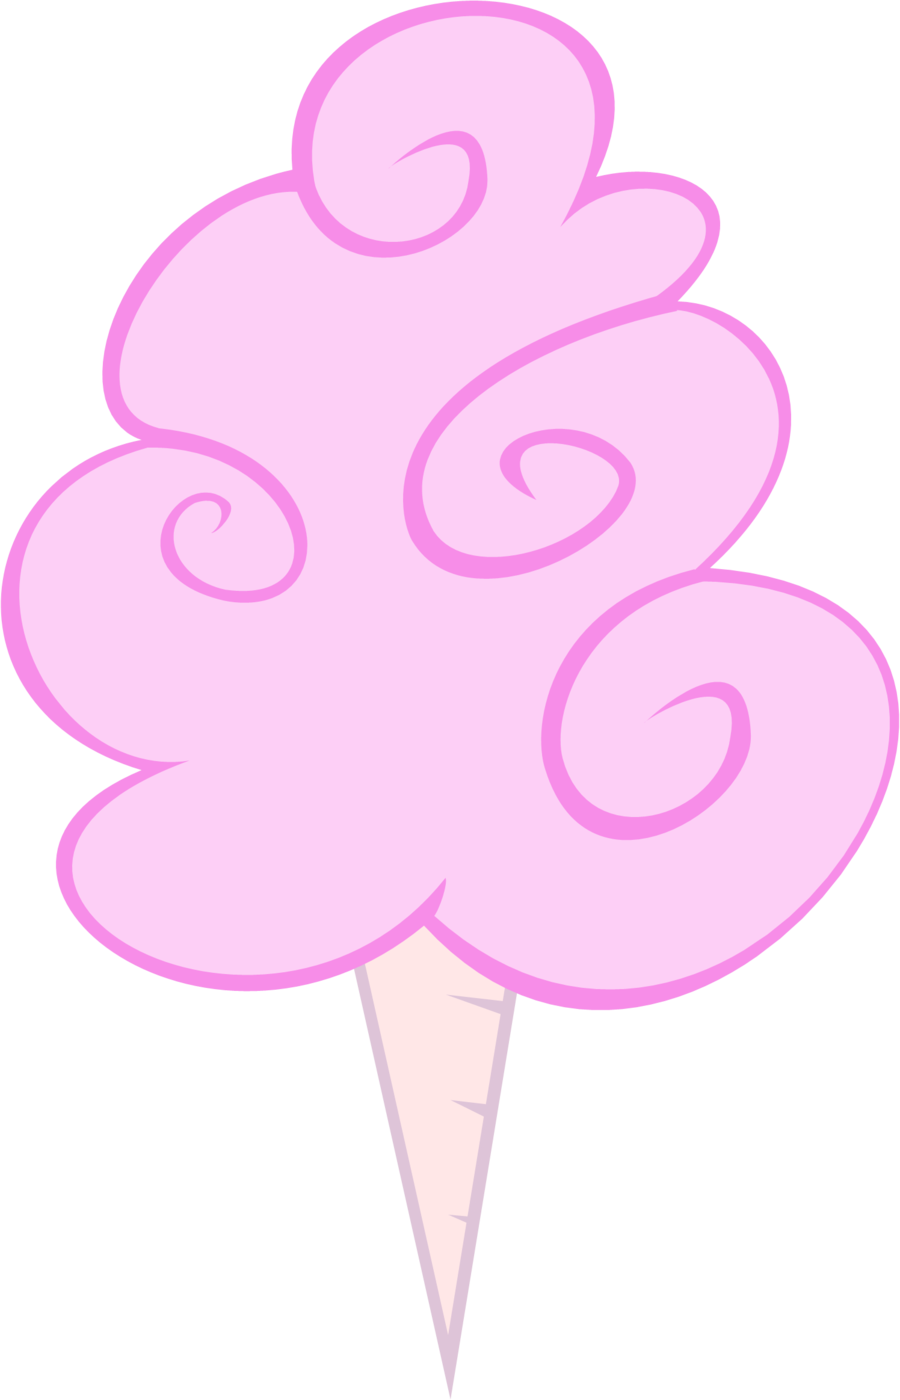 Cotton Candy by Chessie2003 on